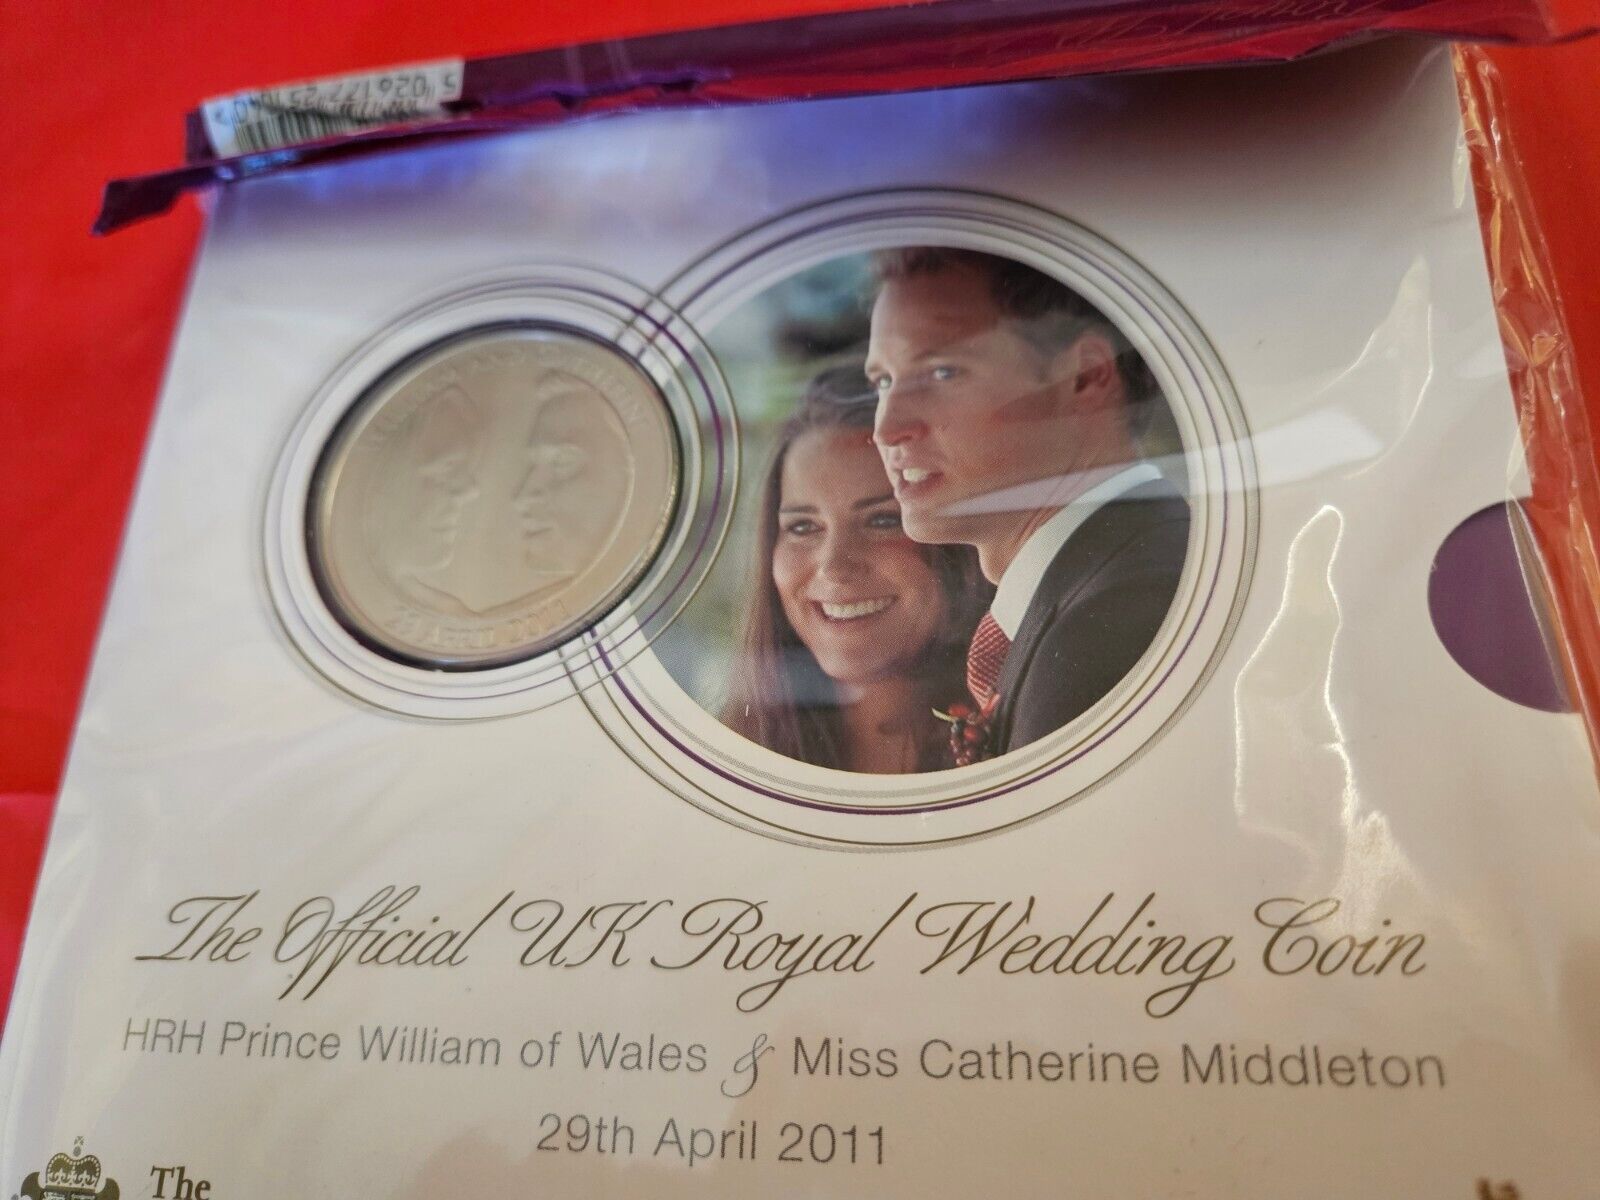 The Official UK British Royal Wedding Coin 2011 - Prince William - Royal Mint